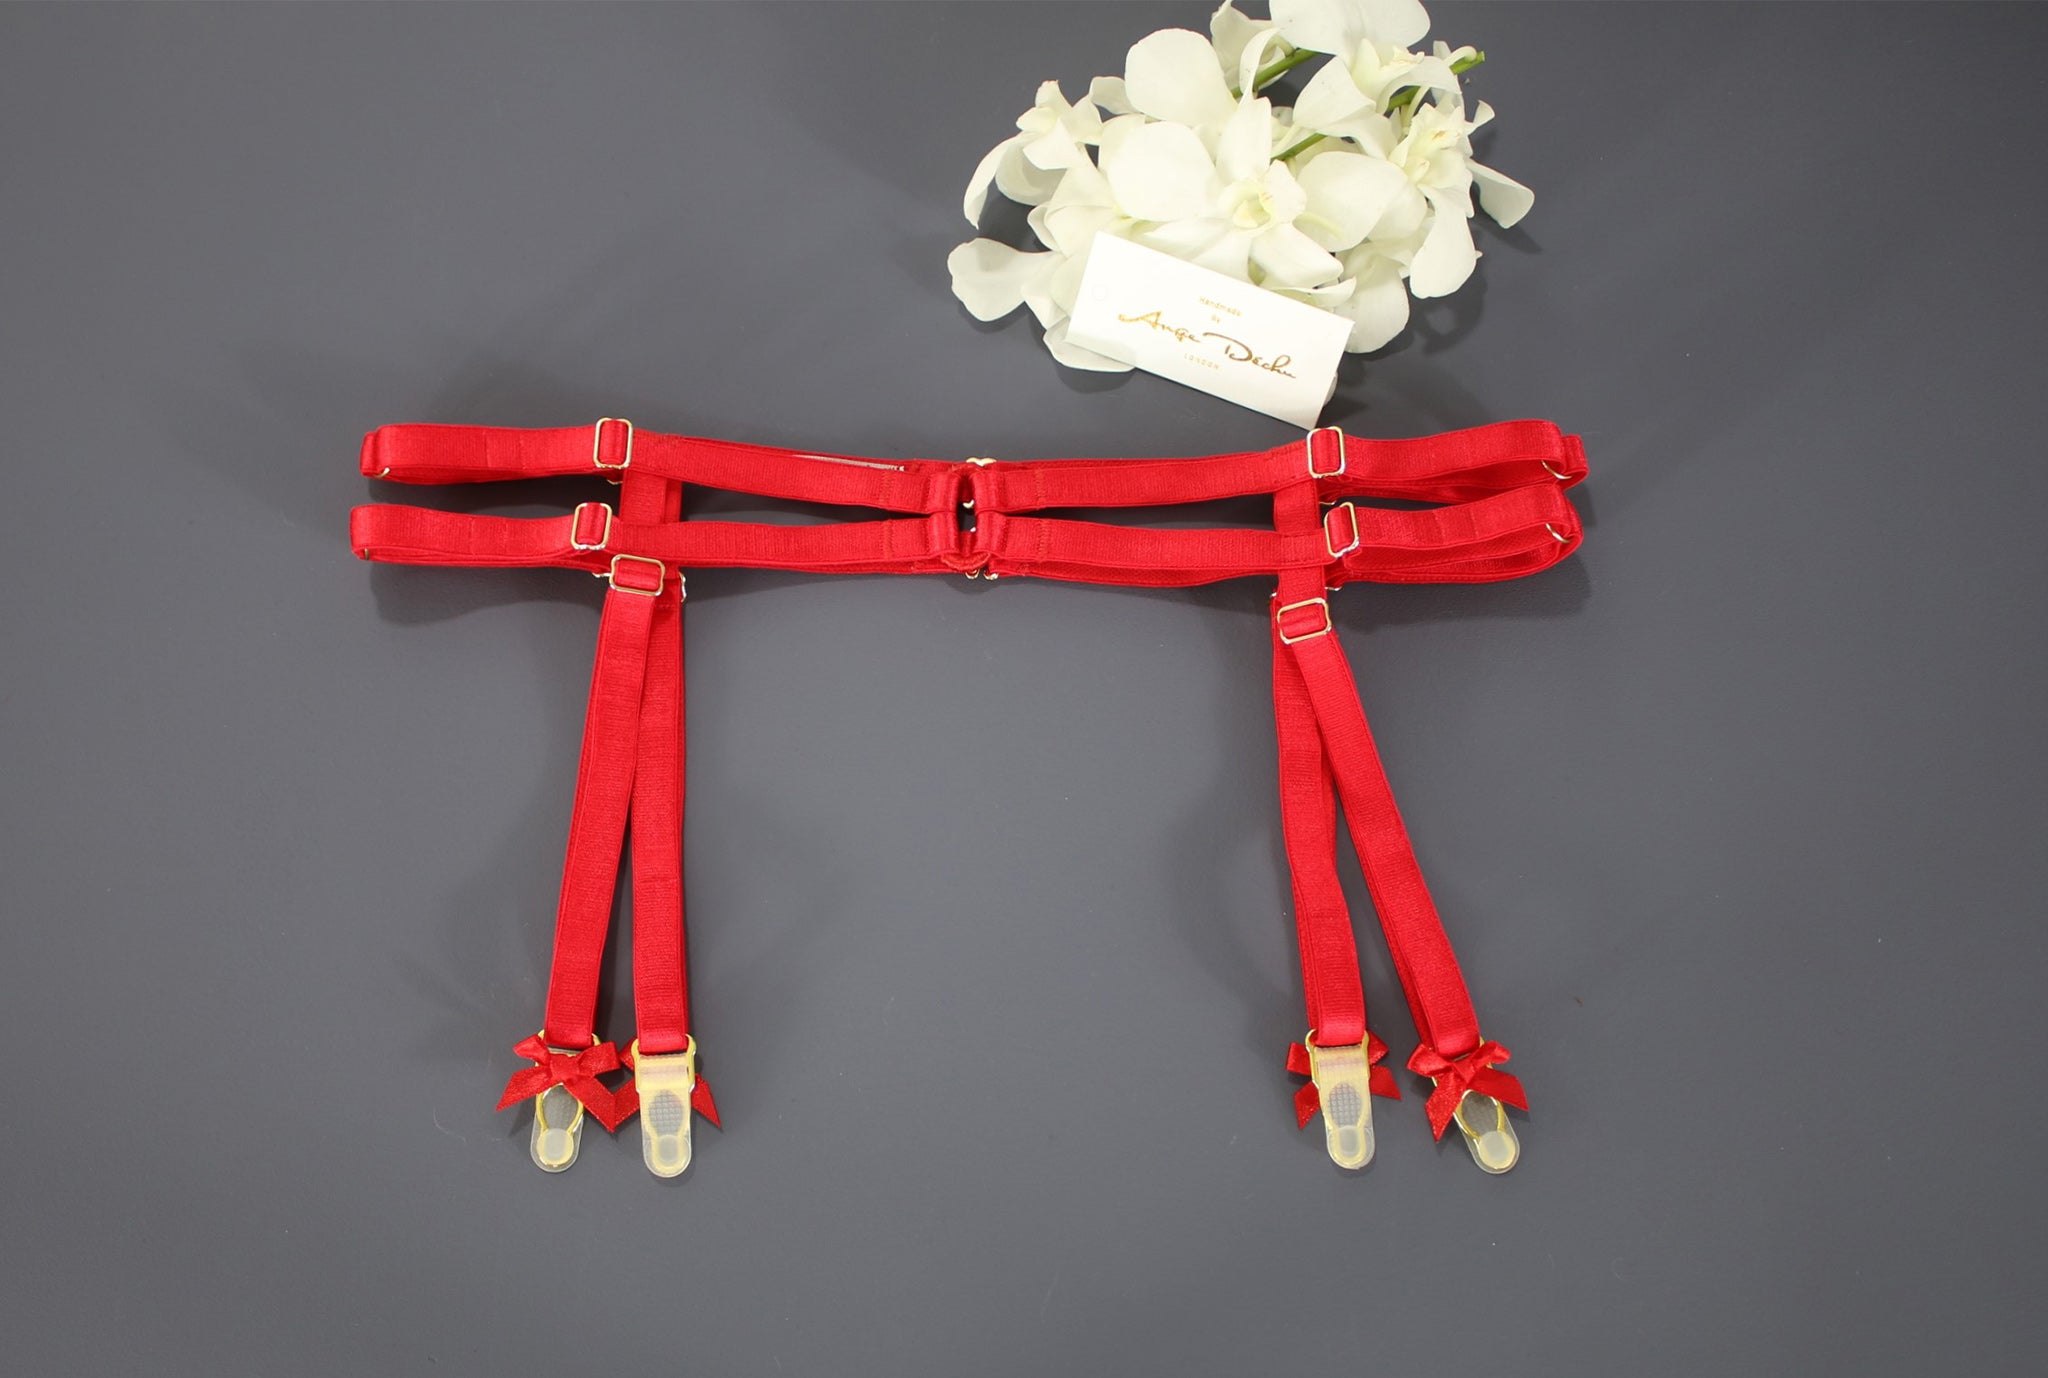 Body harness set in red with choker sexy lingerie bridal garter belt harness garter and suspender boudoir gift for her - Ange Déchu